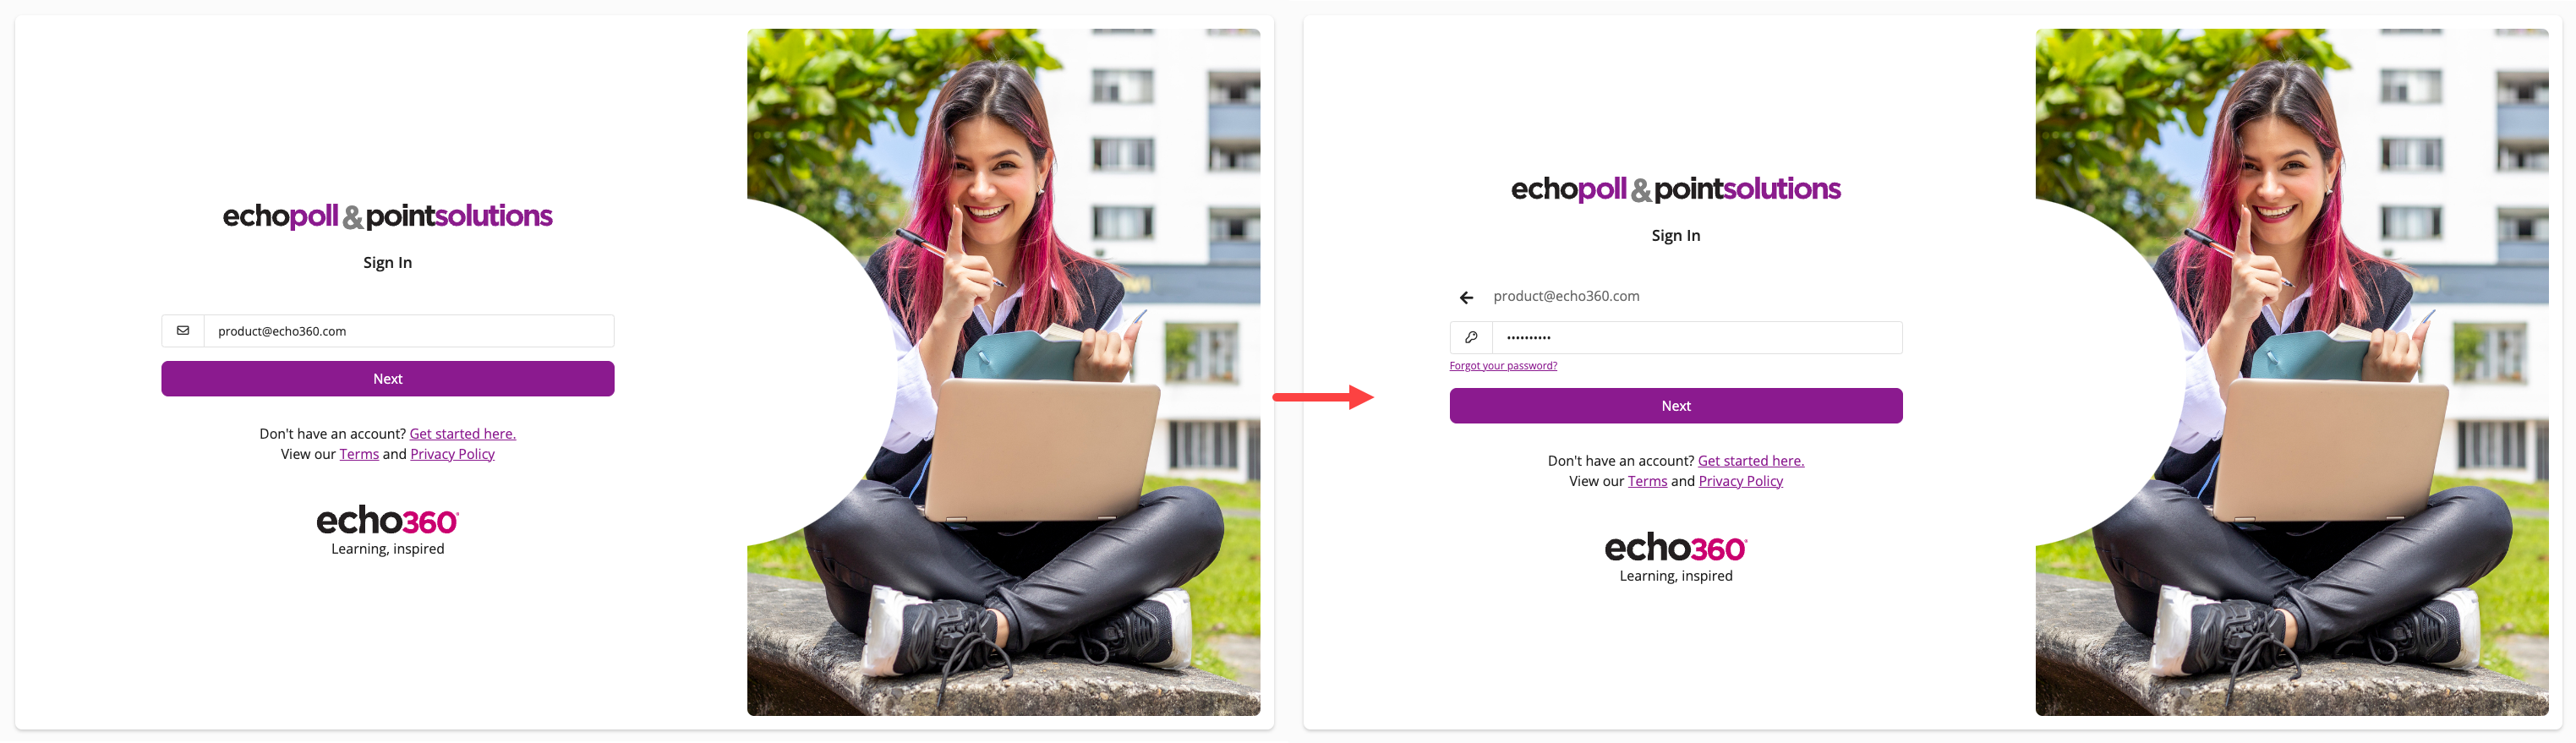 EchoPoll Signin screen showing field for email address and password as identified